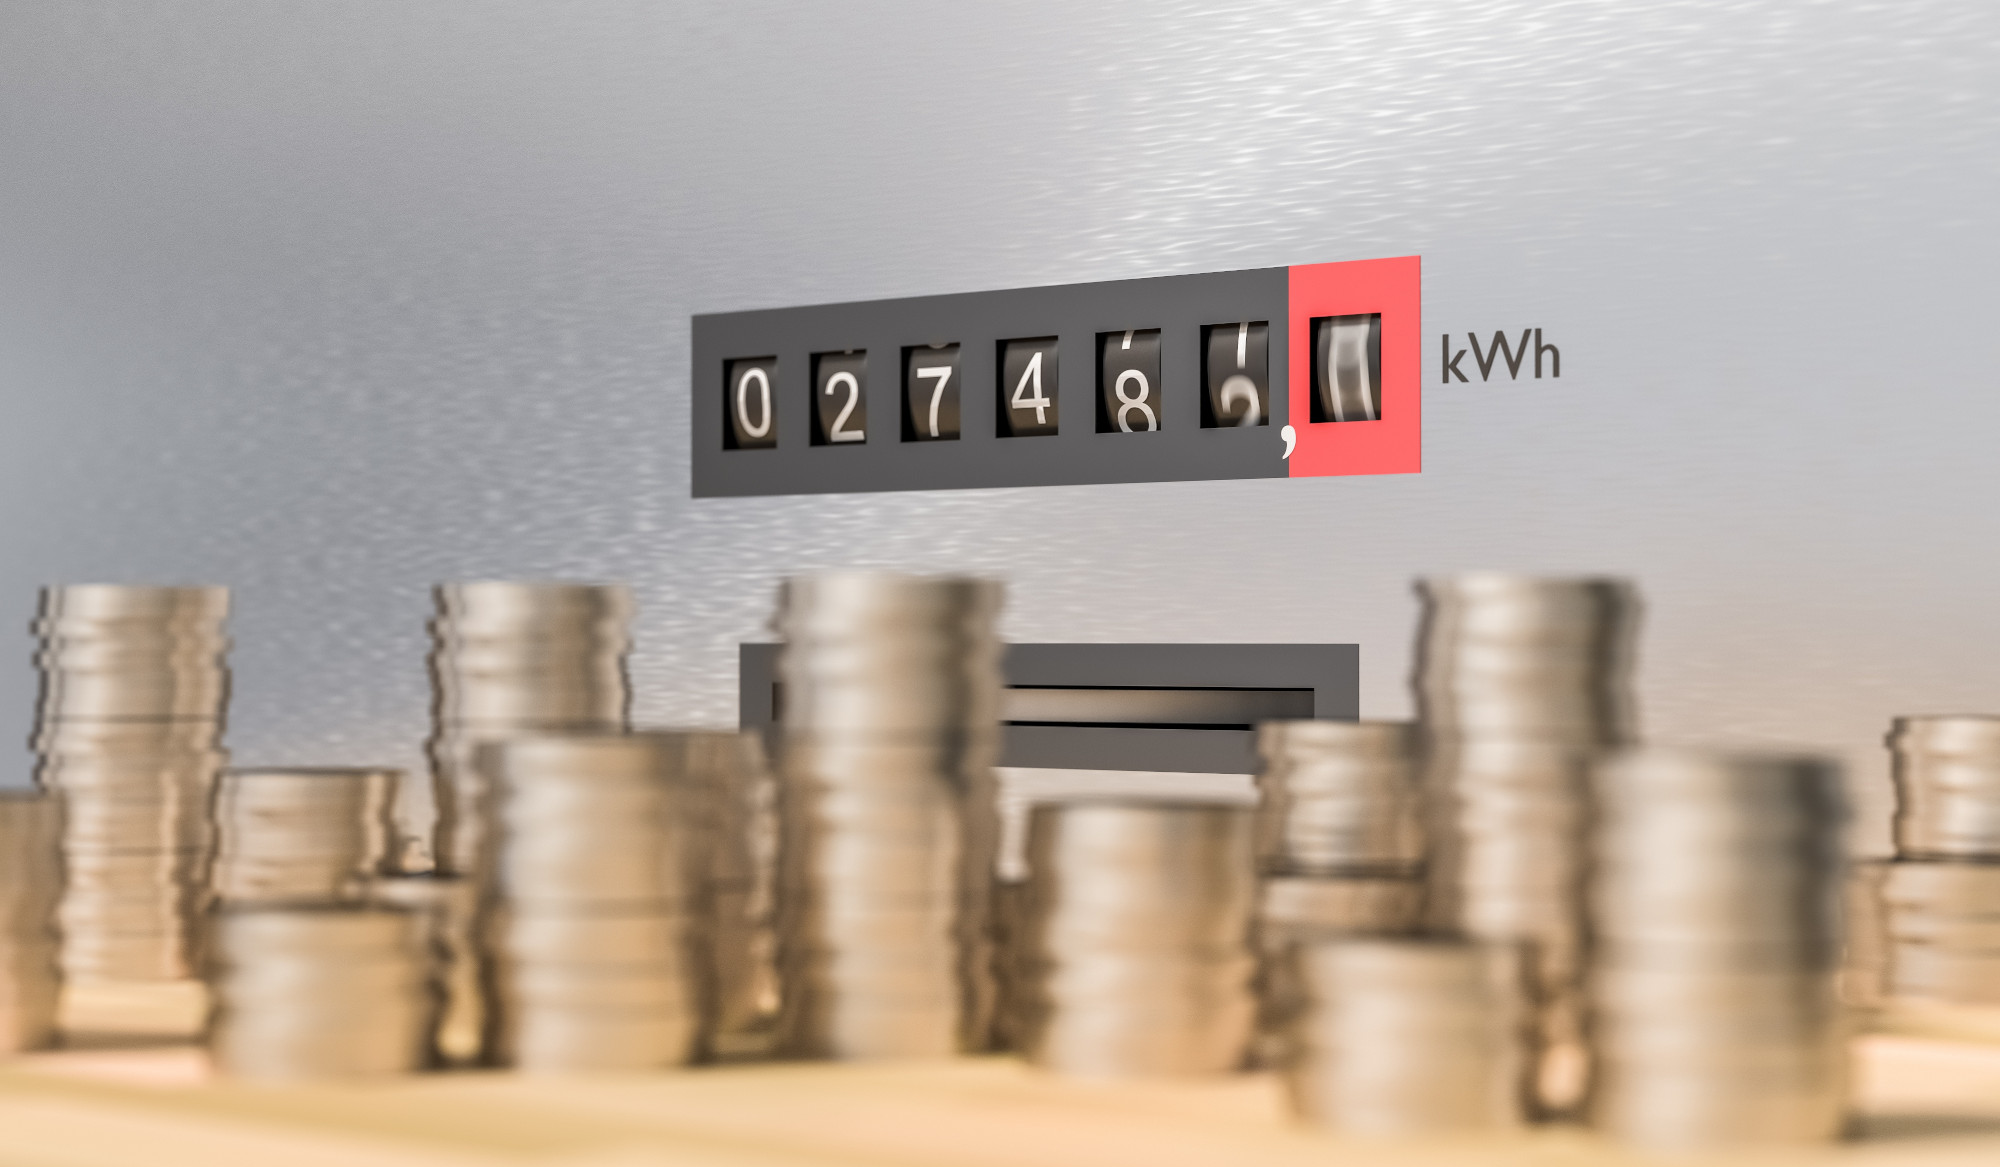 kW vs kWh explained